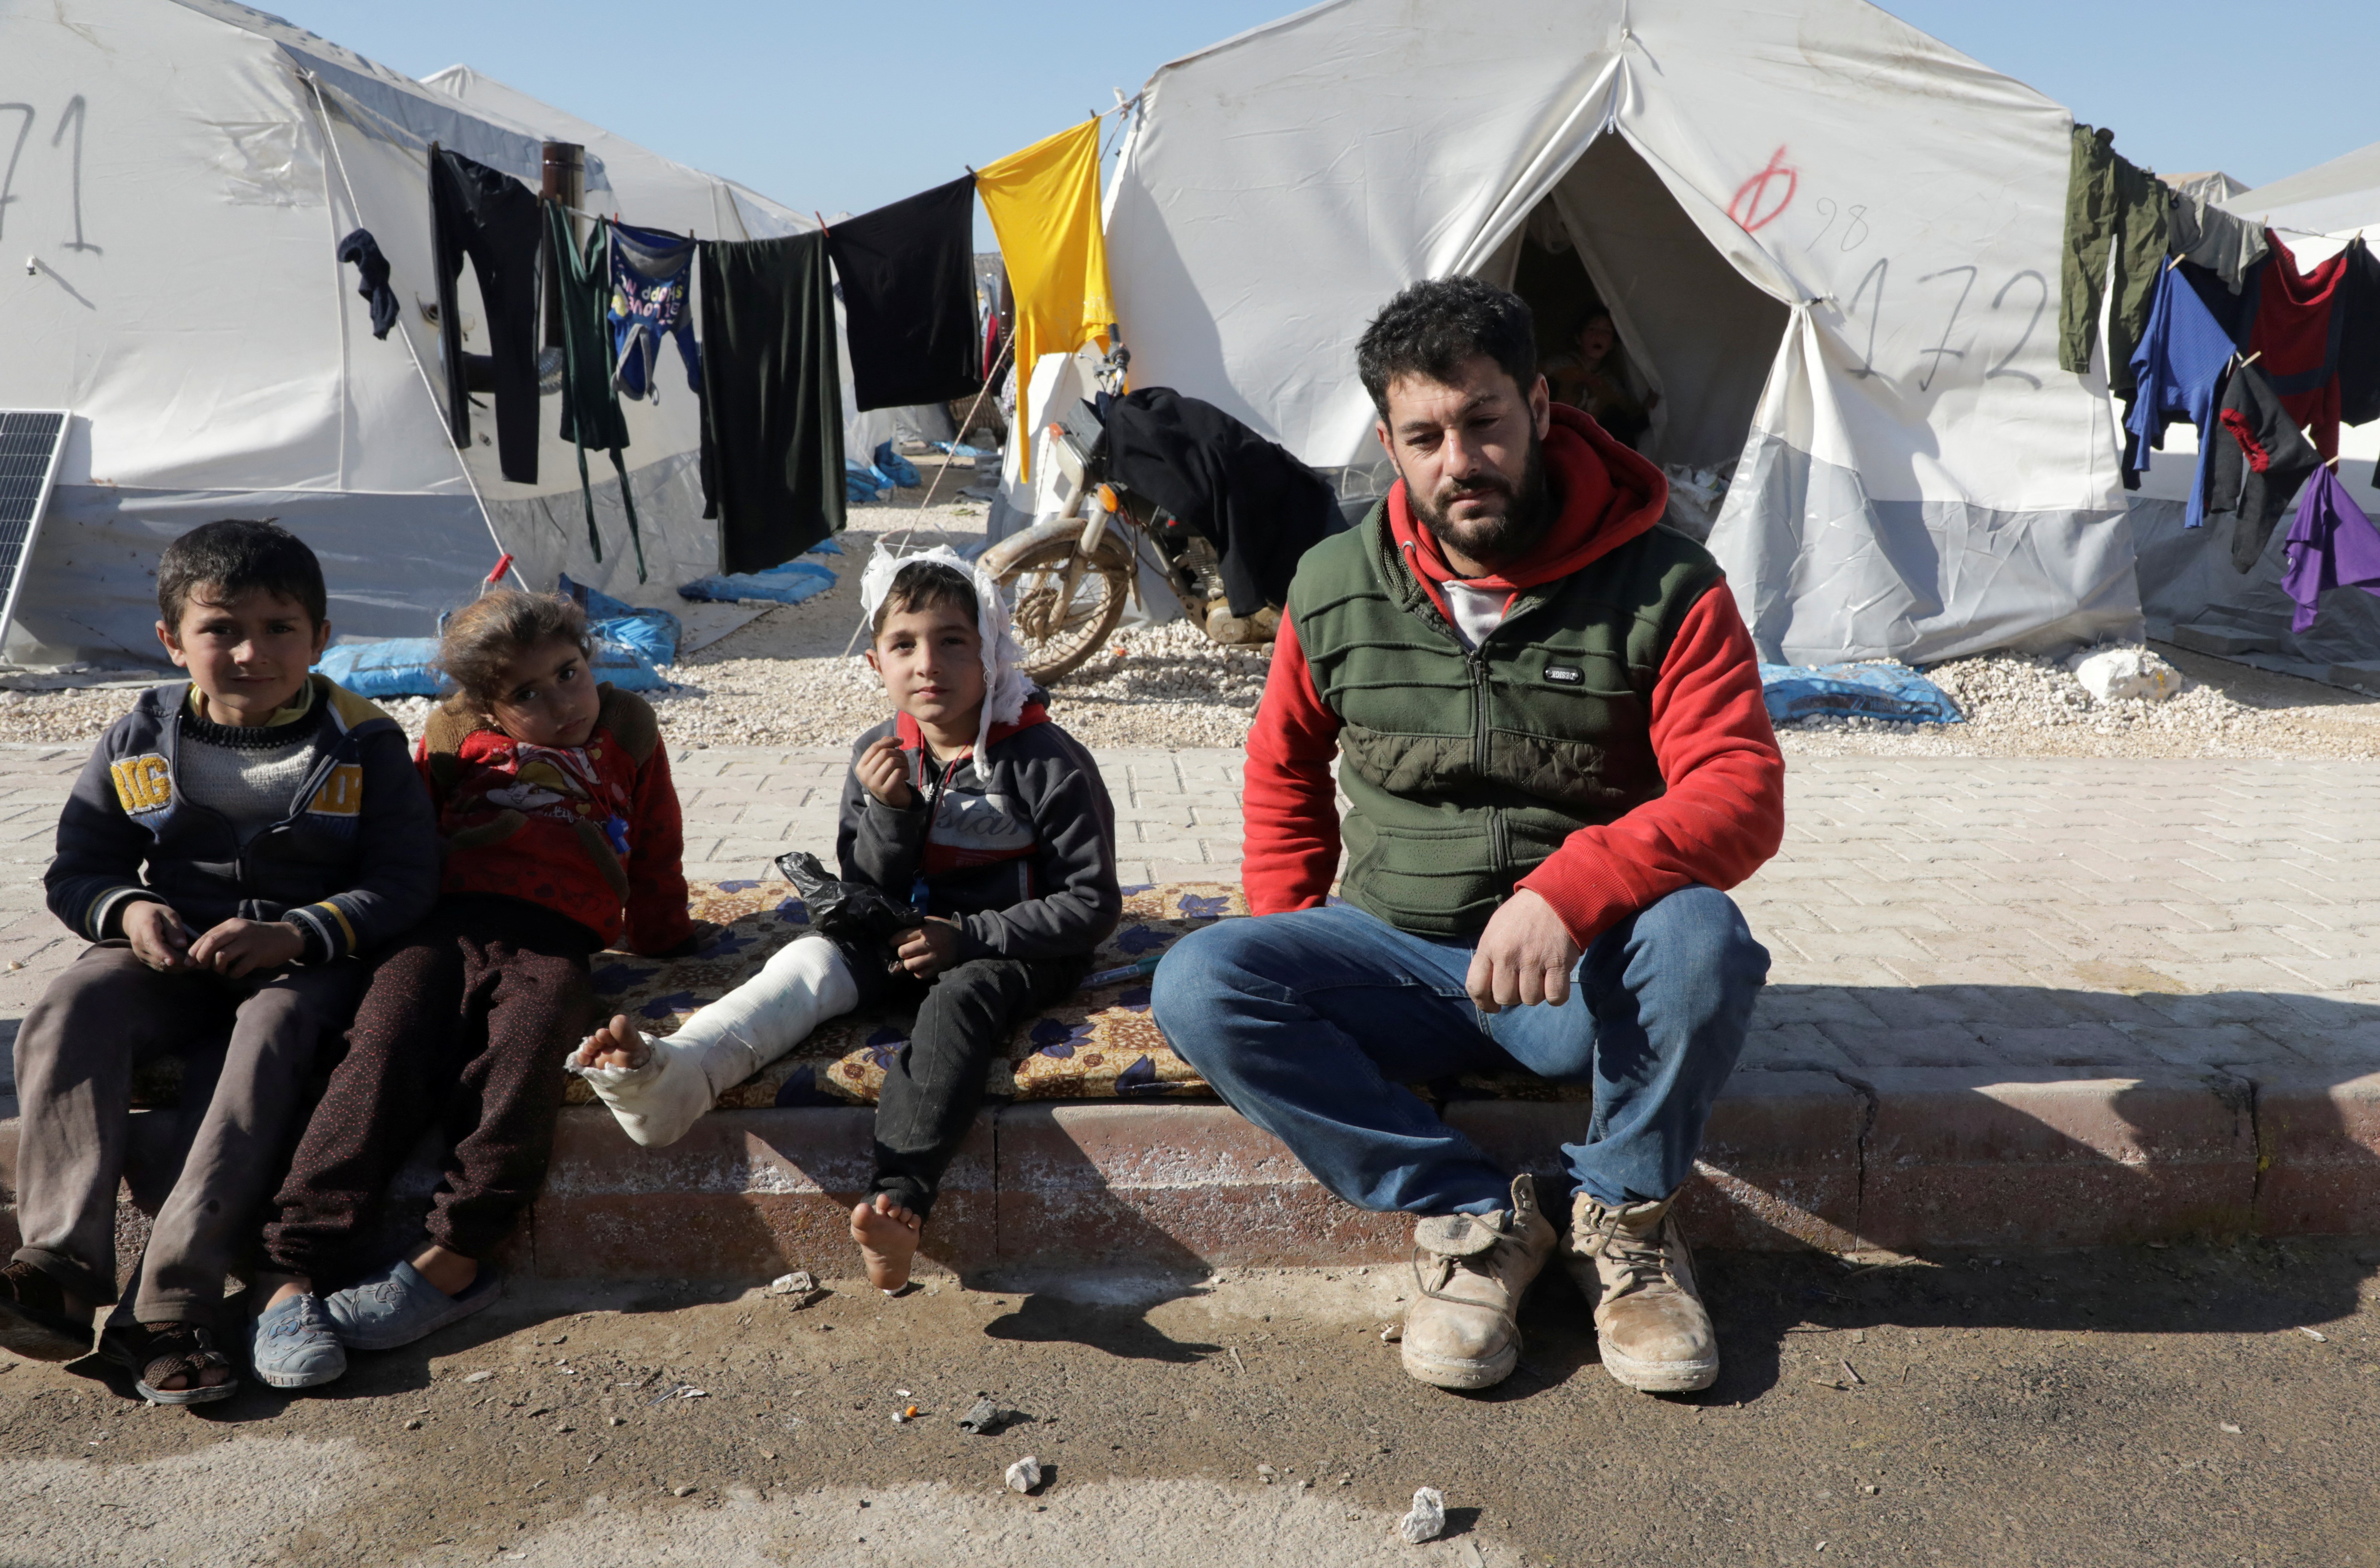 Displaced Syrian man, Omar Barakat, sits next to an injured child at a camp for earthquake survivors, on the outskirts of rebel-held town of Jandaris, Syria February 17, 2023. Photo: Reuters